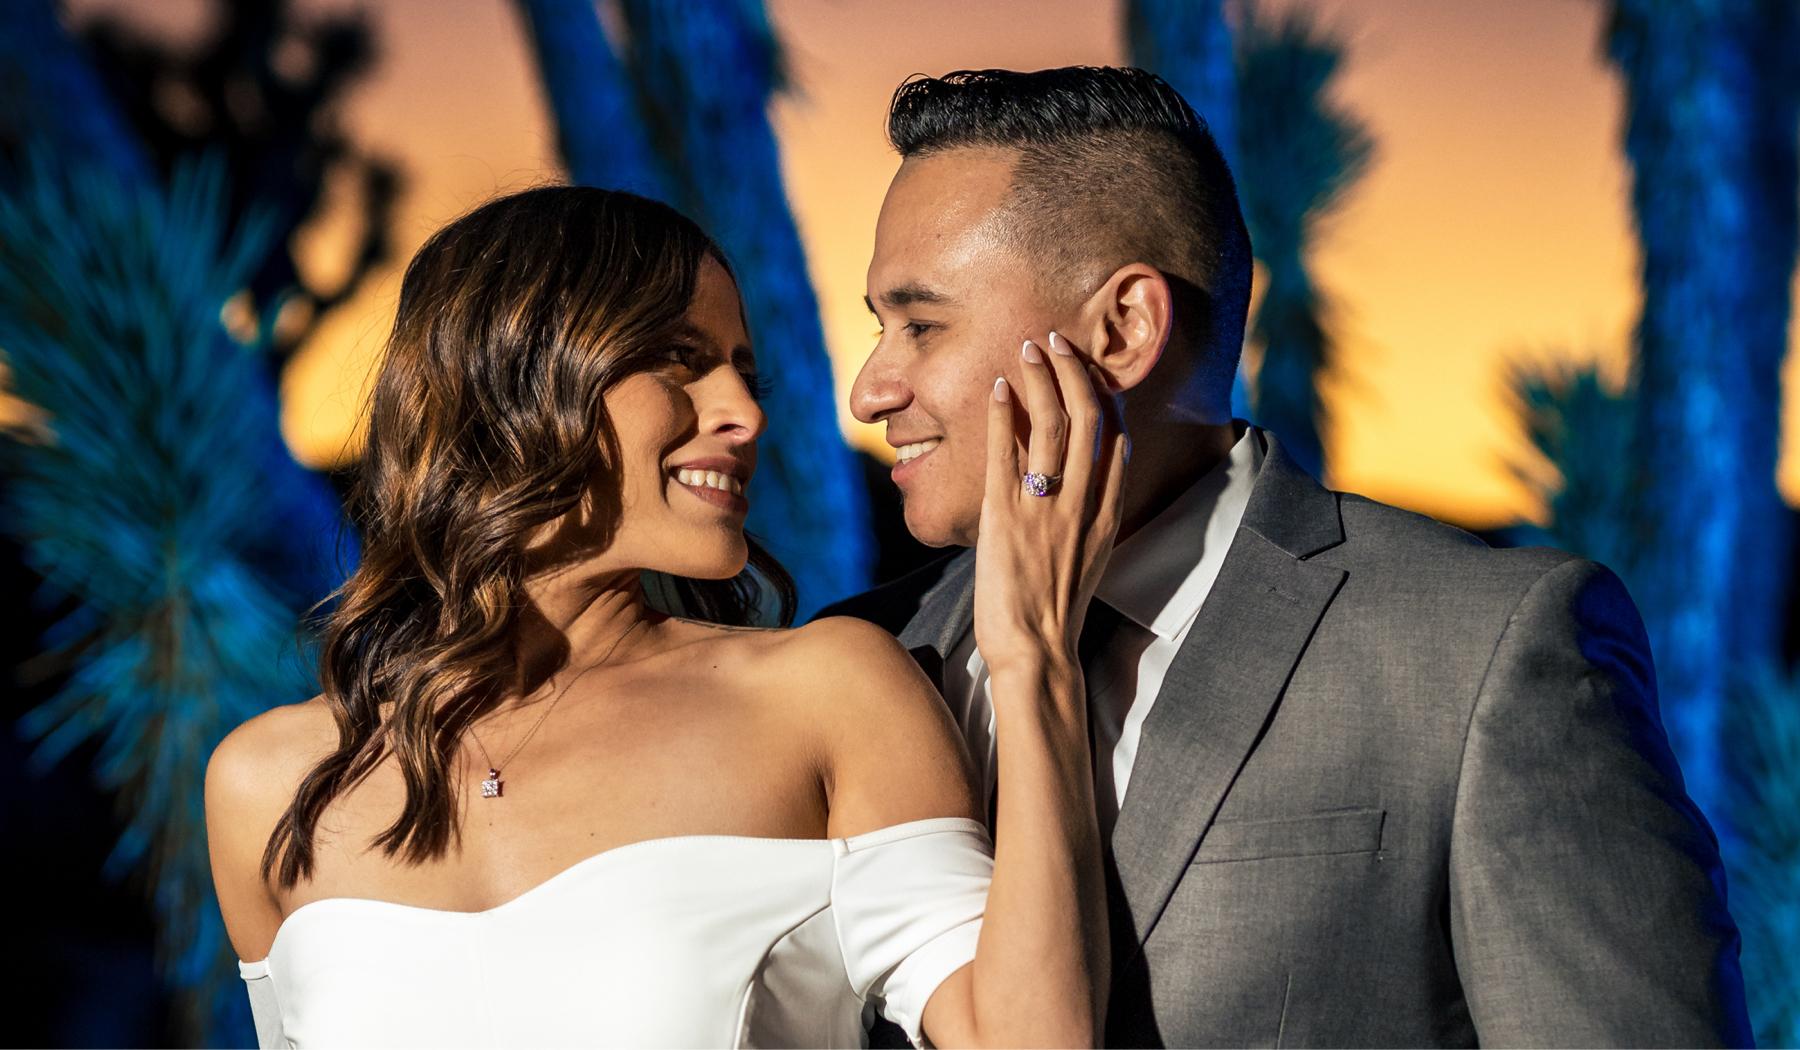 The Wedding Website of Bryanna Morales and Freddy Diaz